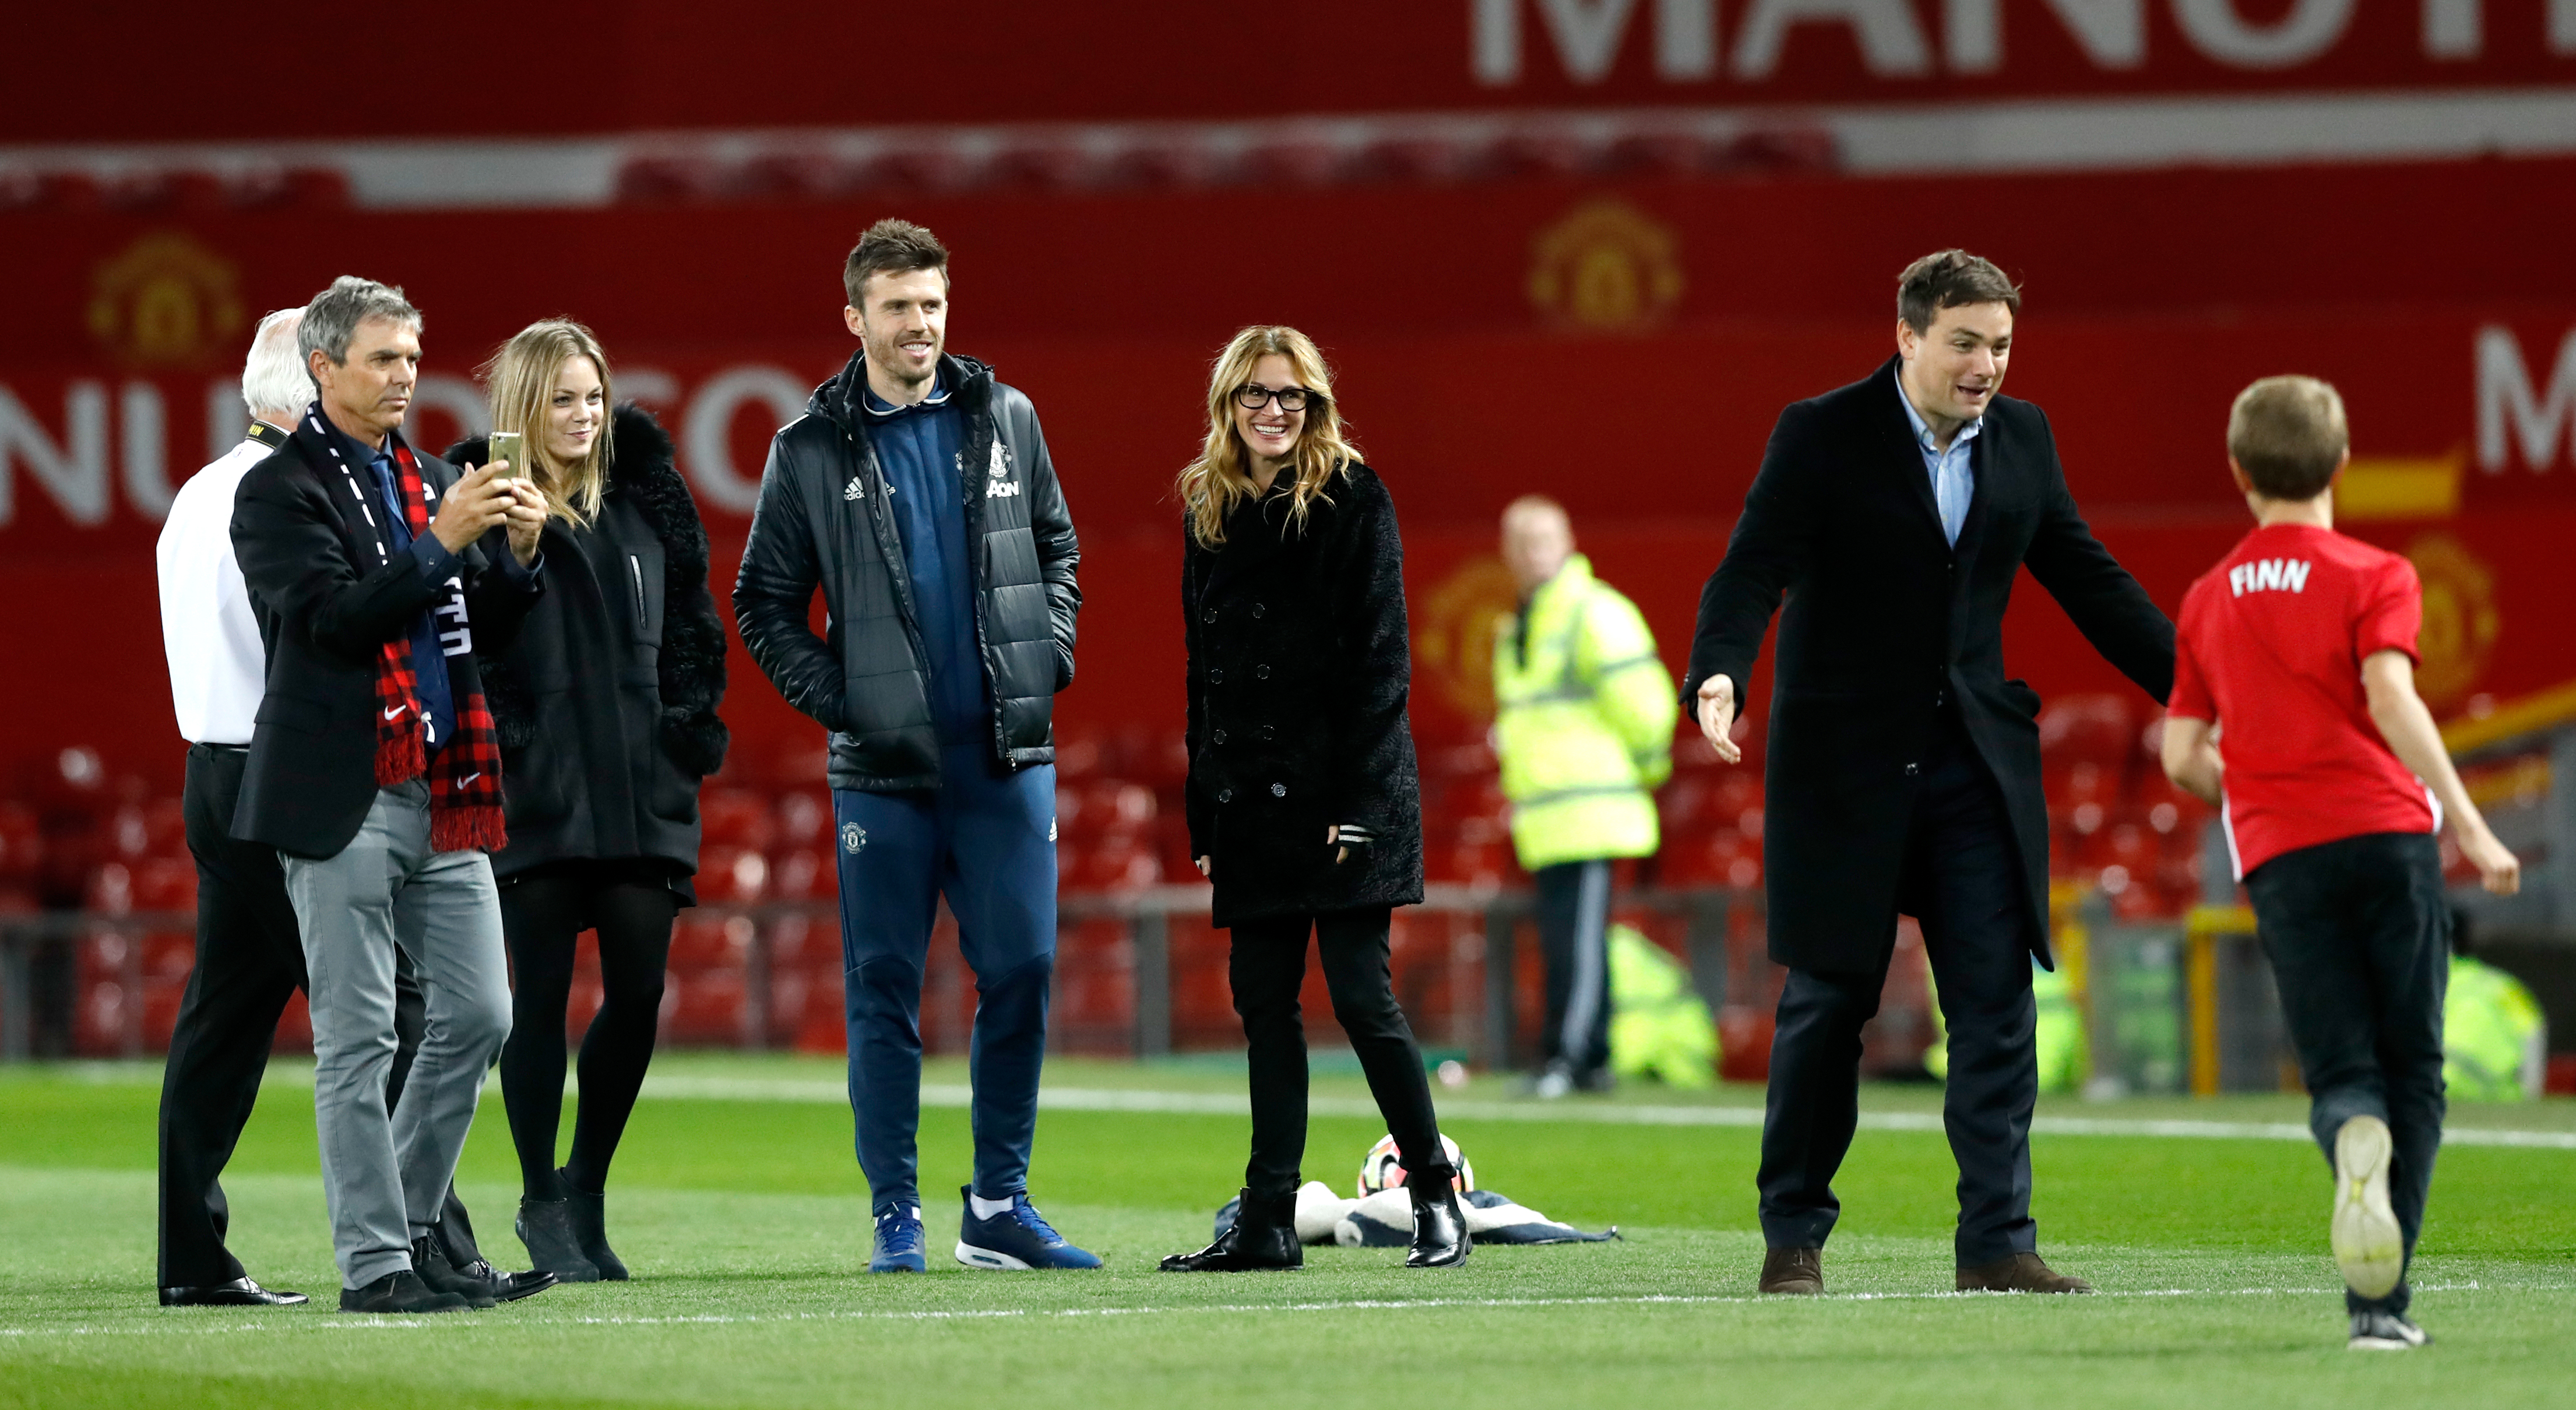 Julia Roberts with her children on the field after the Premier League match at Old Trafford, London | Source: Getty Images